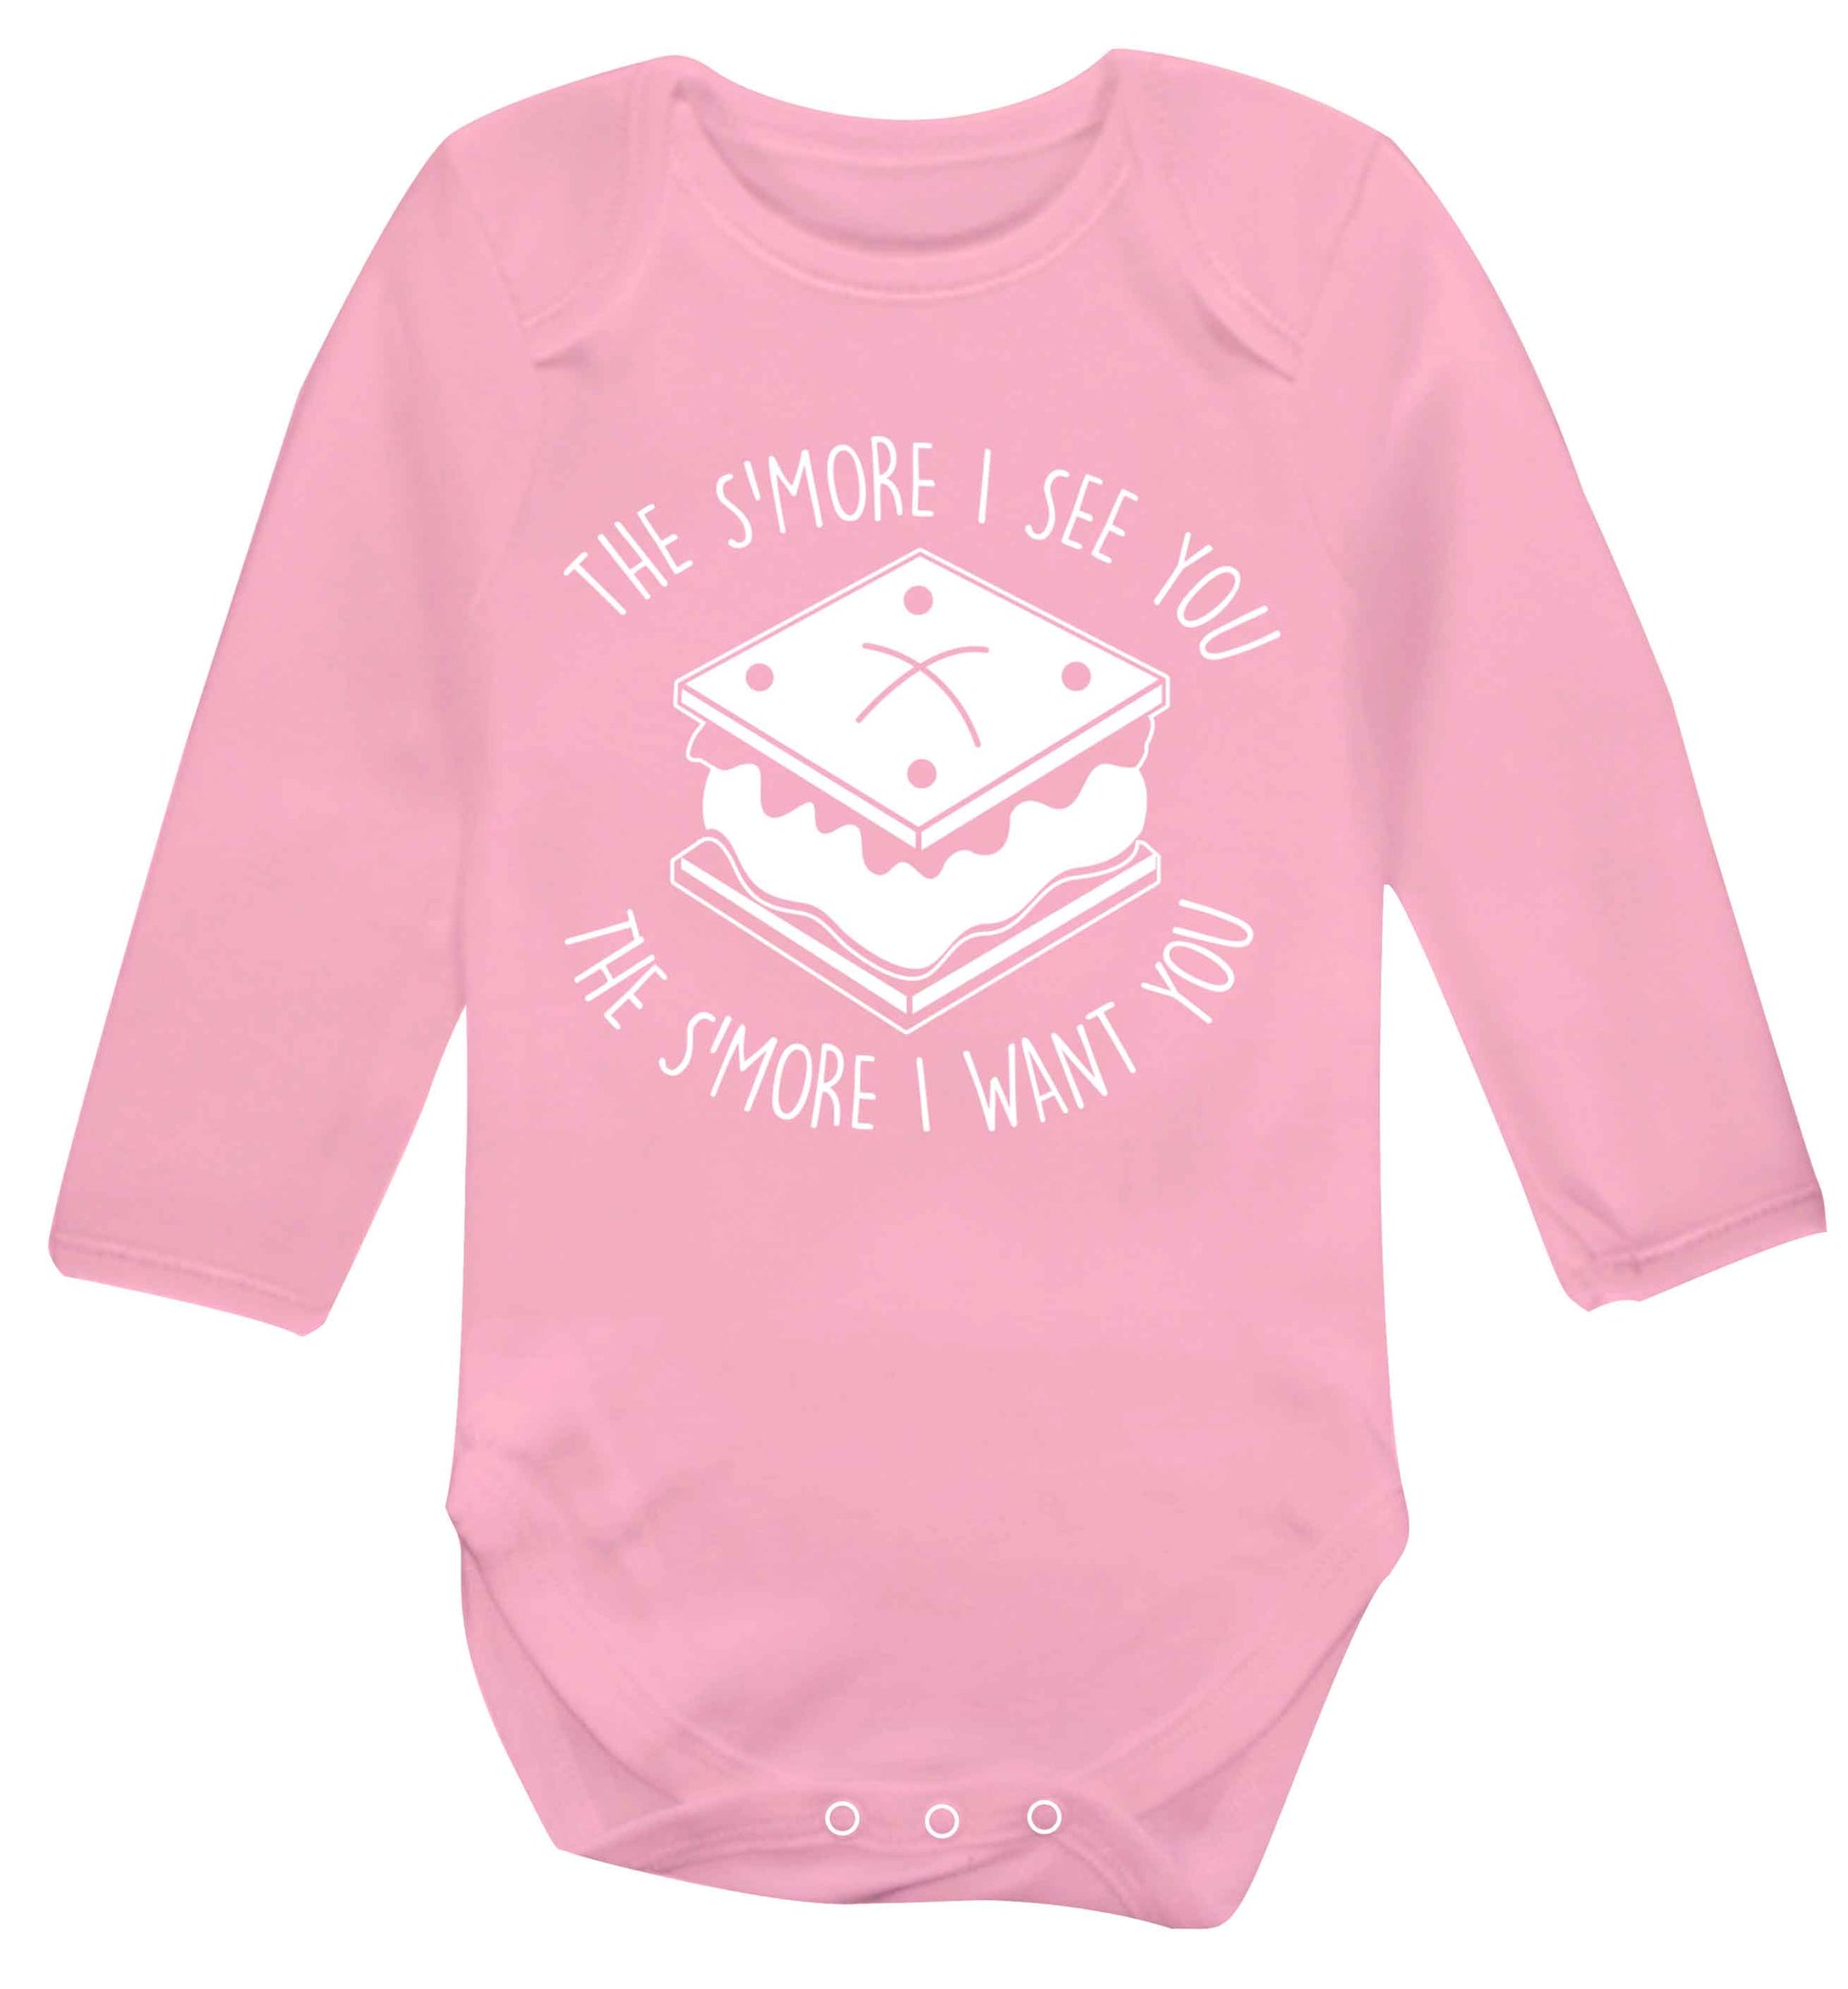 The s'more I see you the s'more I want you Baby Vest long sleeved pale pink 6-12 months